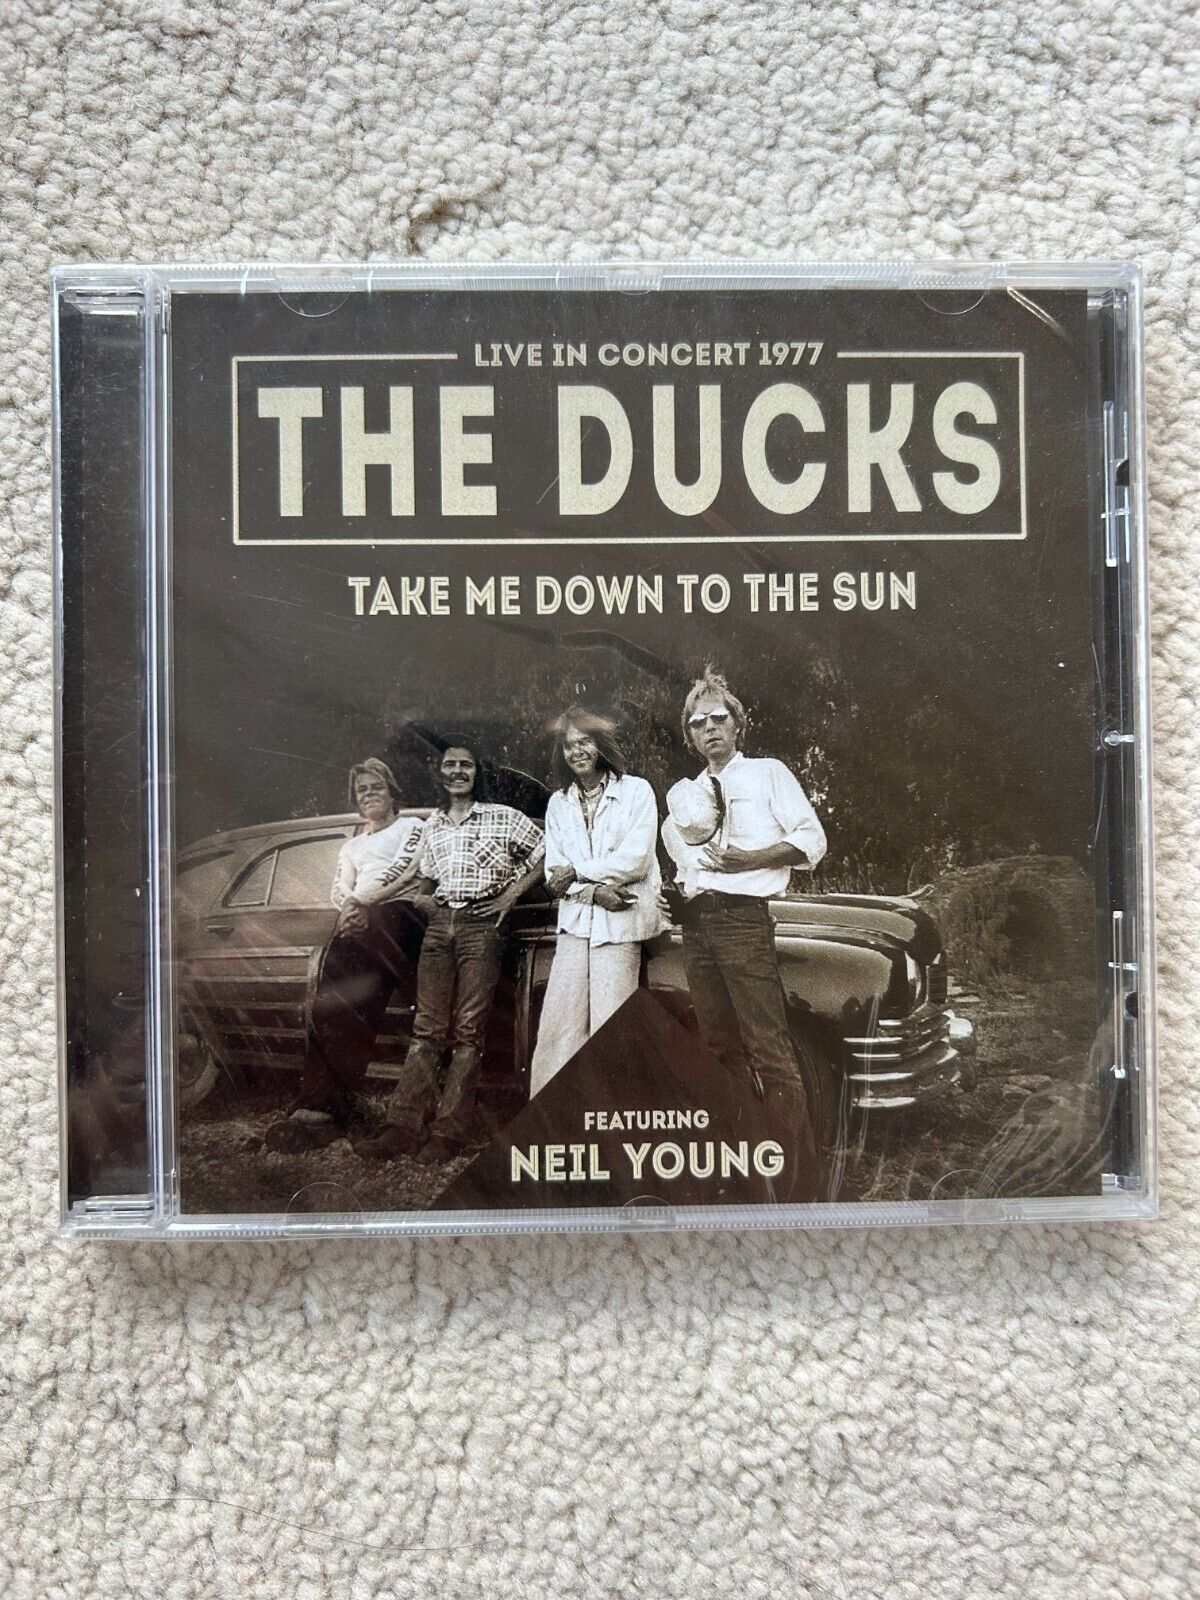 THE DUCKS feat NEIL YOUNG - TAKE ME DOWN TO THE SUN - BRAND NEW & SEALED CD